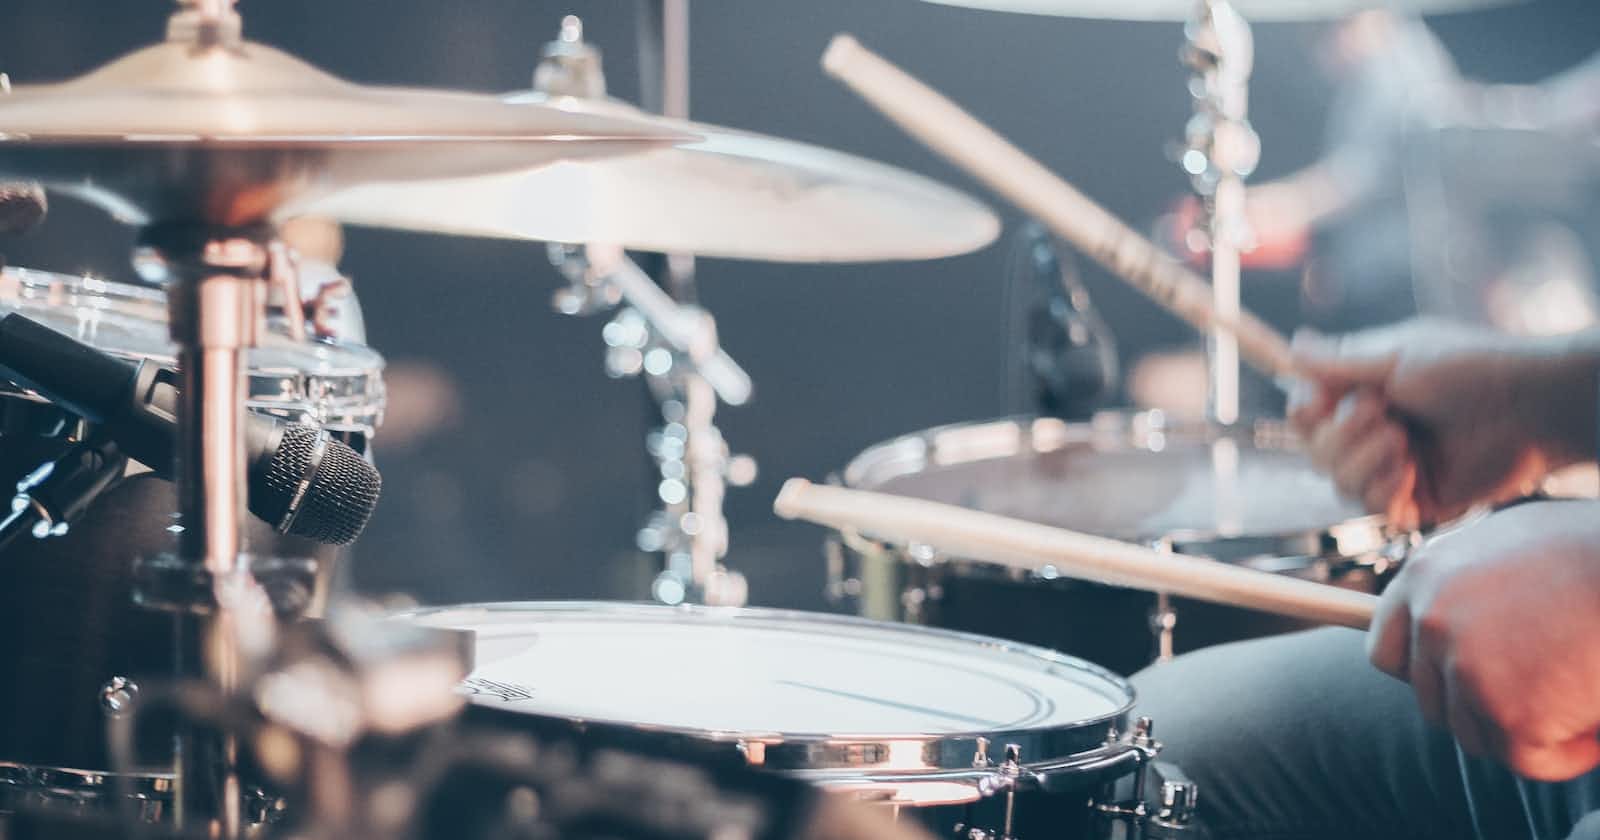 How To Build a JavaScript Drum Kit using Event Listeners 🥁